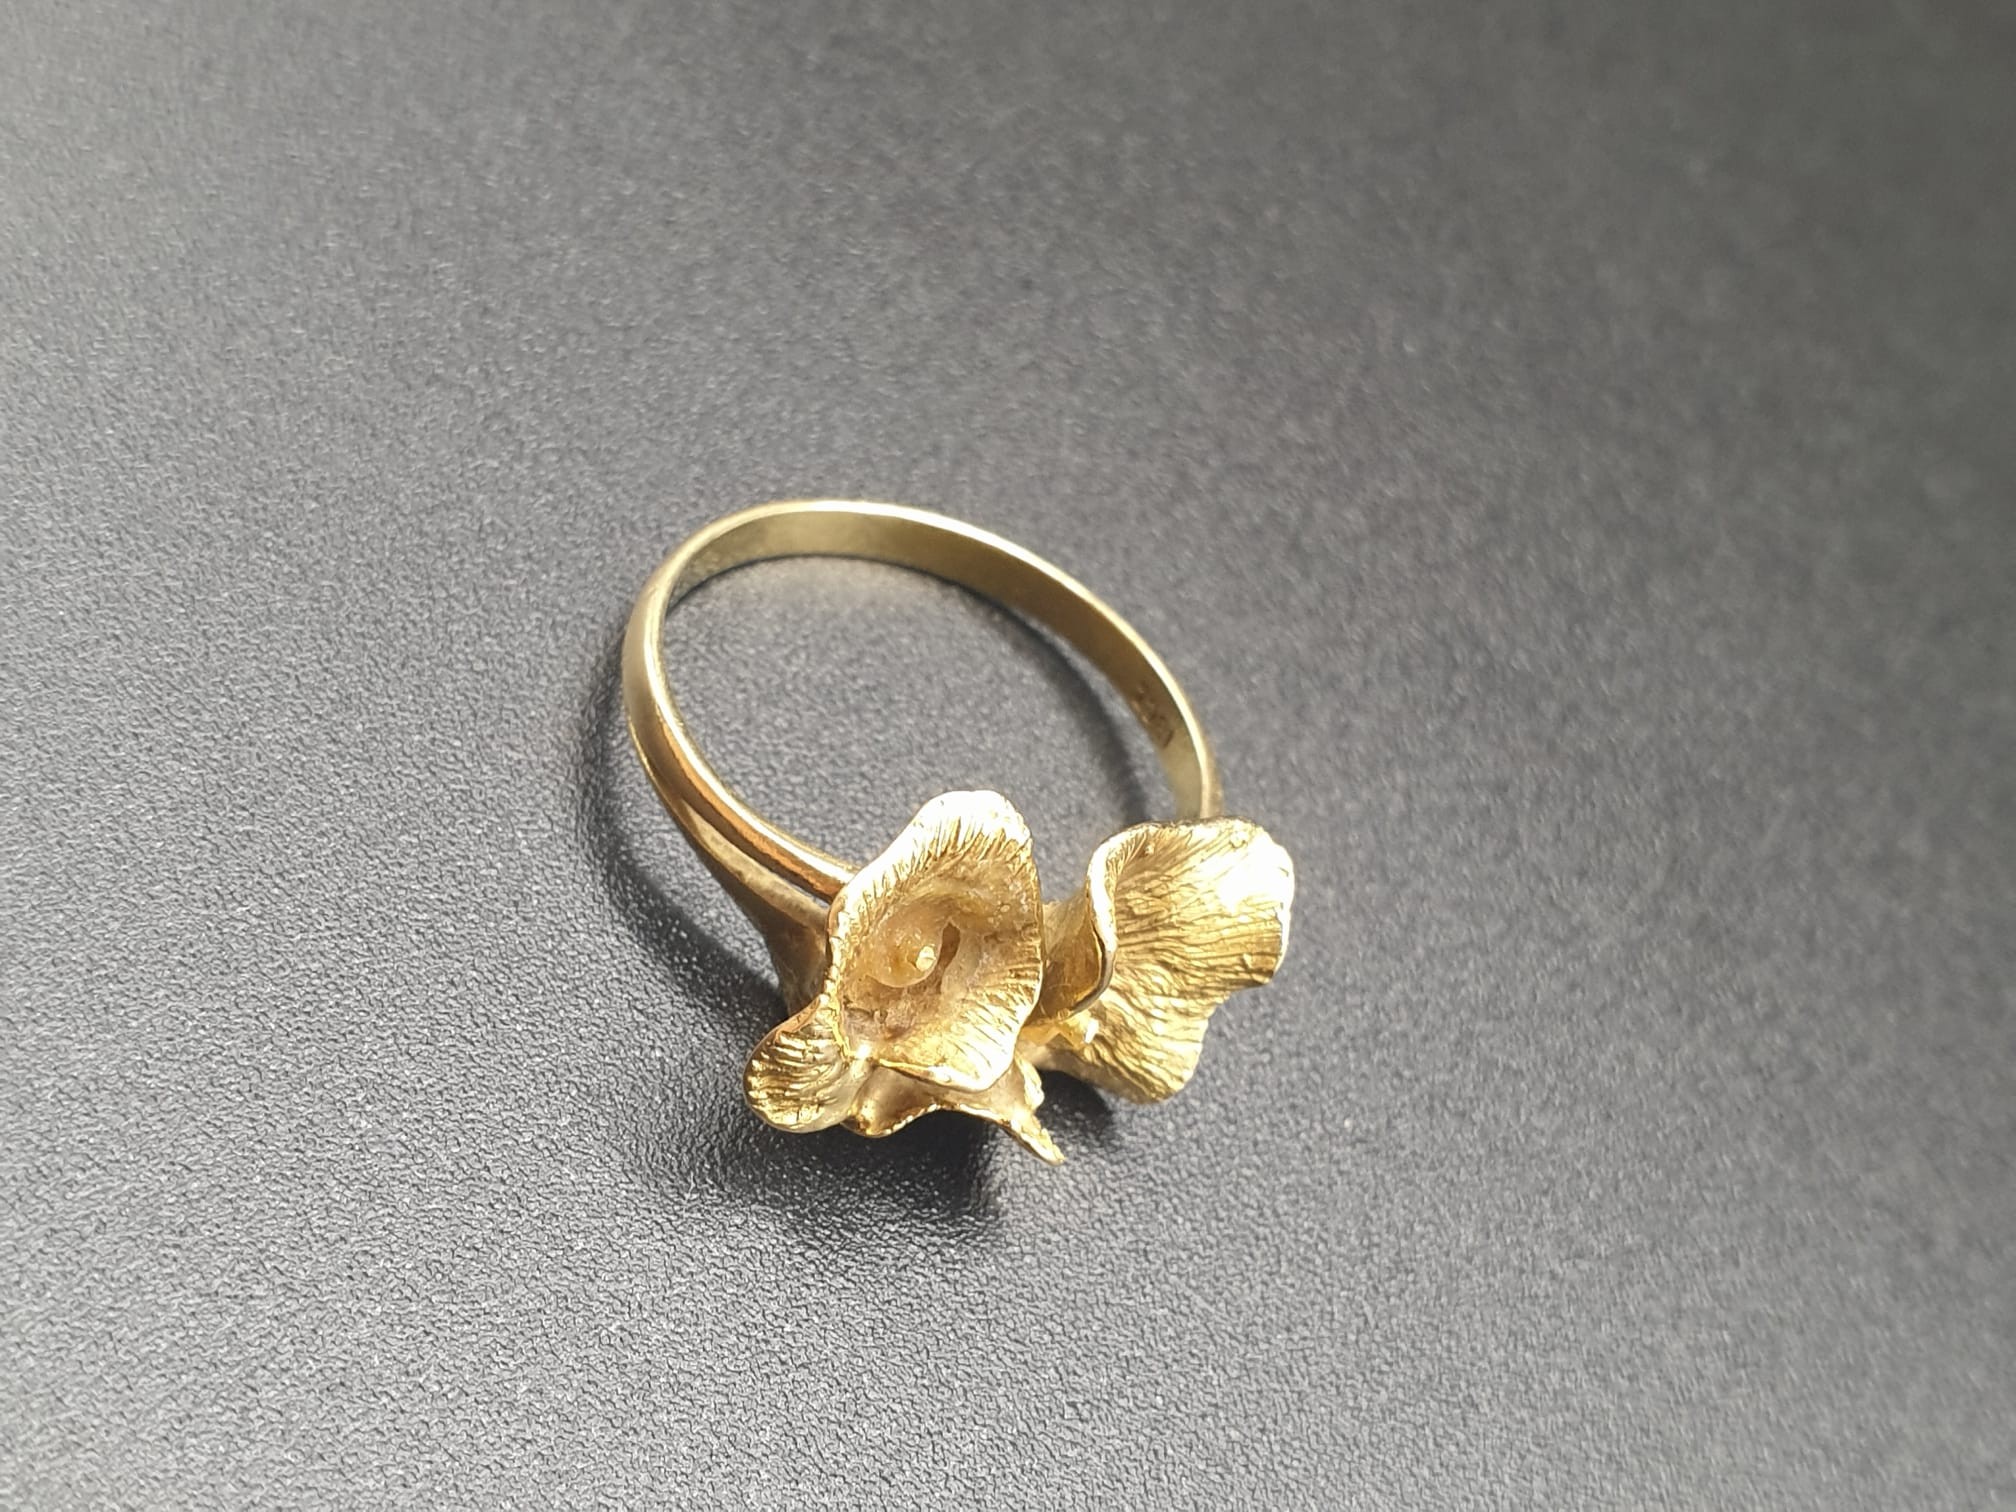 18K Yellow Gold Ladies Ring with Floral Decoration. Size N. 3.55g - Image 2 of 7